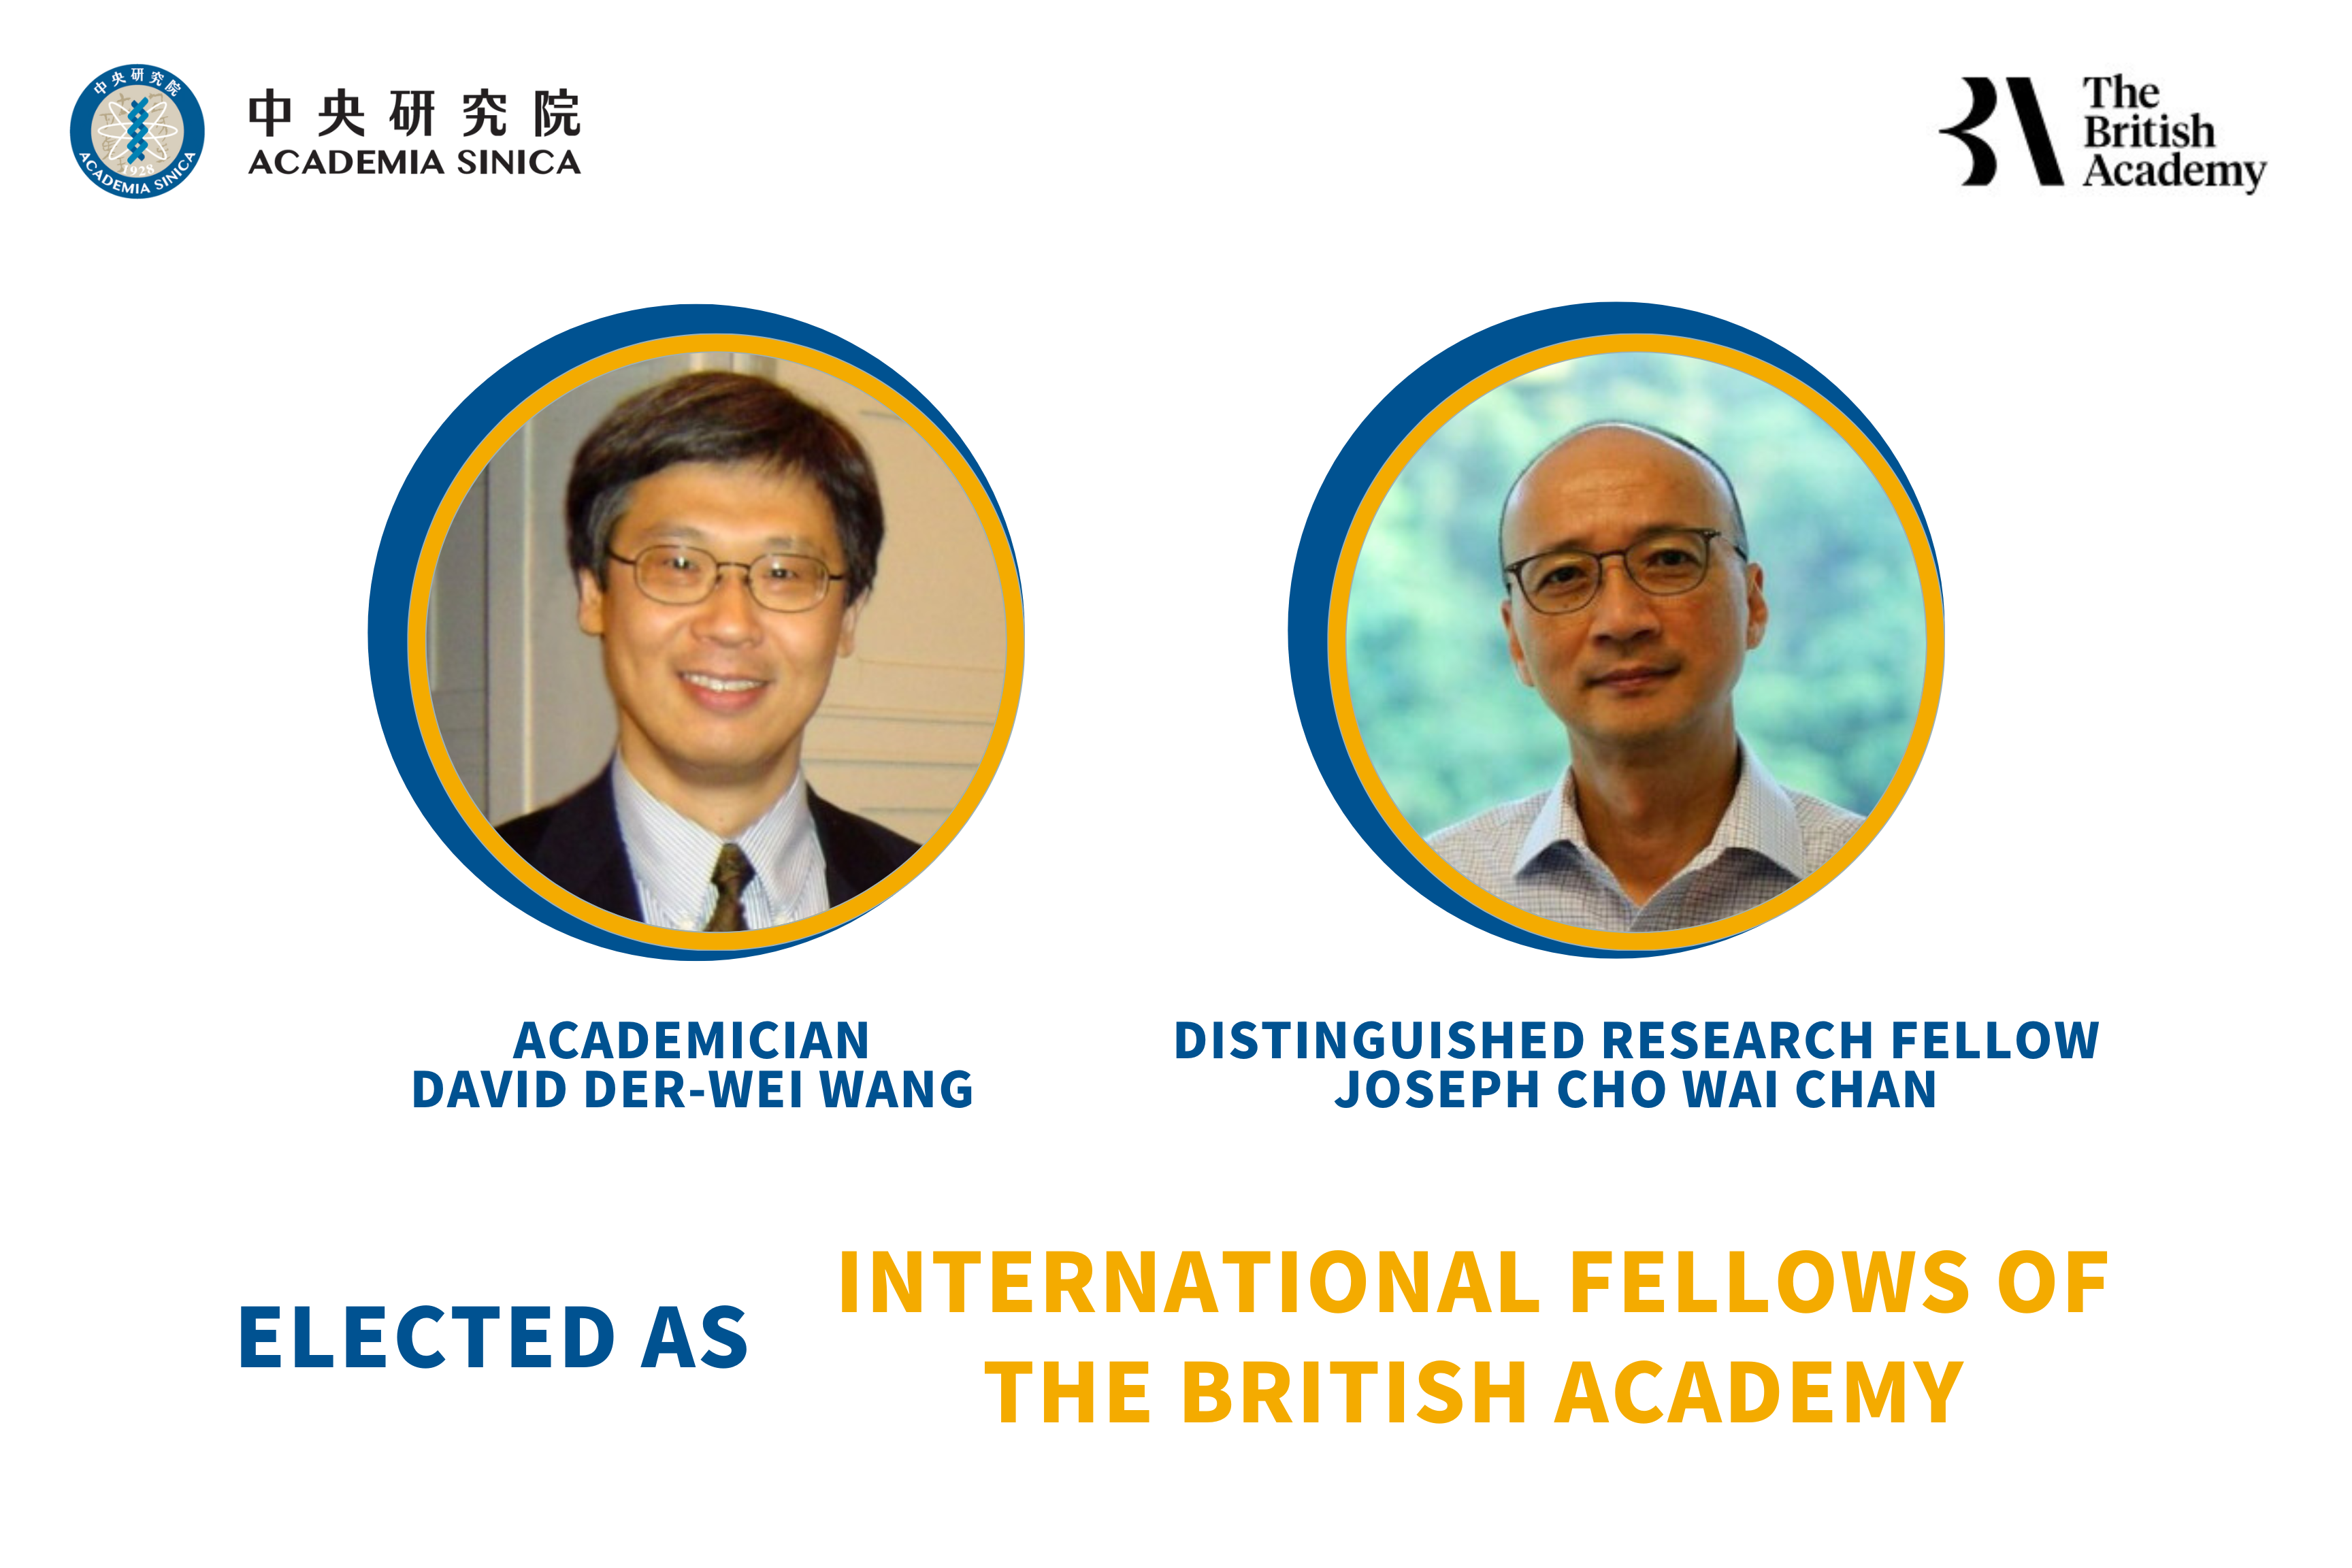 Academician David Der-wei WANG and Dr. Joseph Cho Wai CHAN, Distinguished Research Fellow at Academia Sinica’s Research Center for Humanities and Social Sciences, Elected as International Fellows of the British Academy